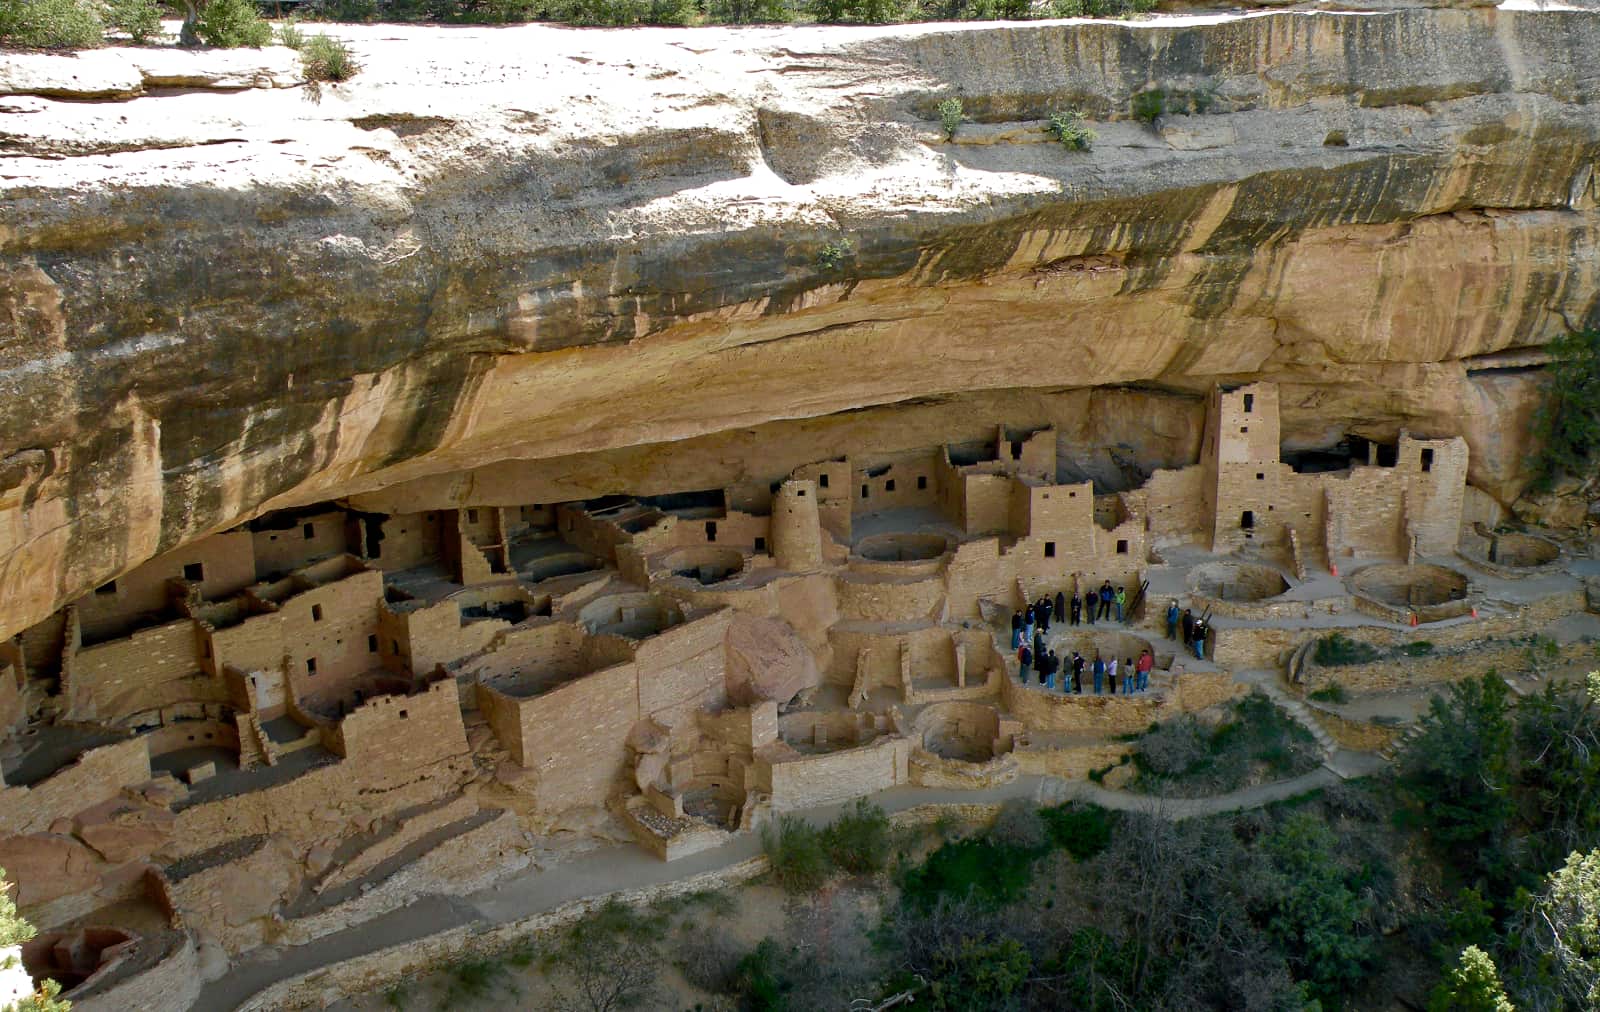 Indigenous stone village and group of people in background